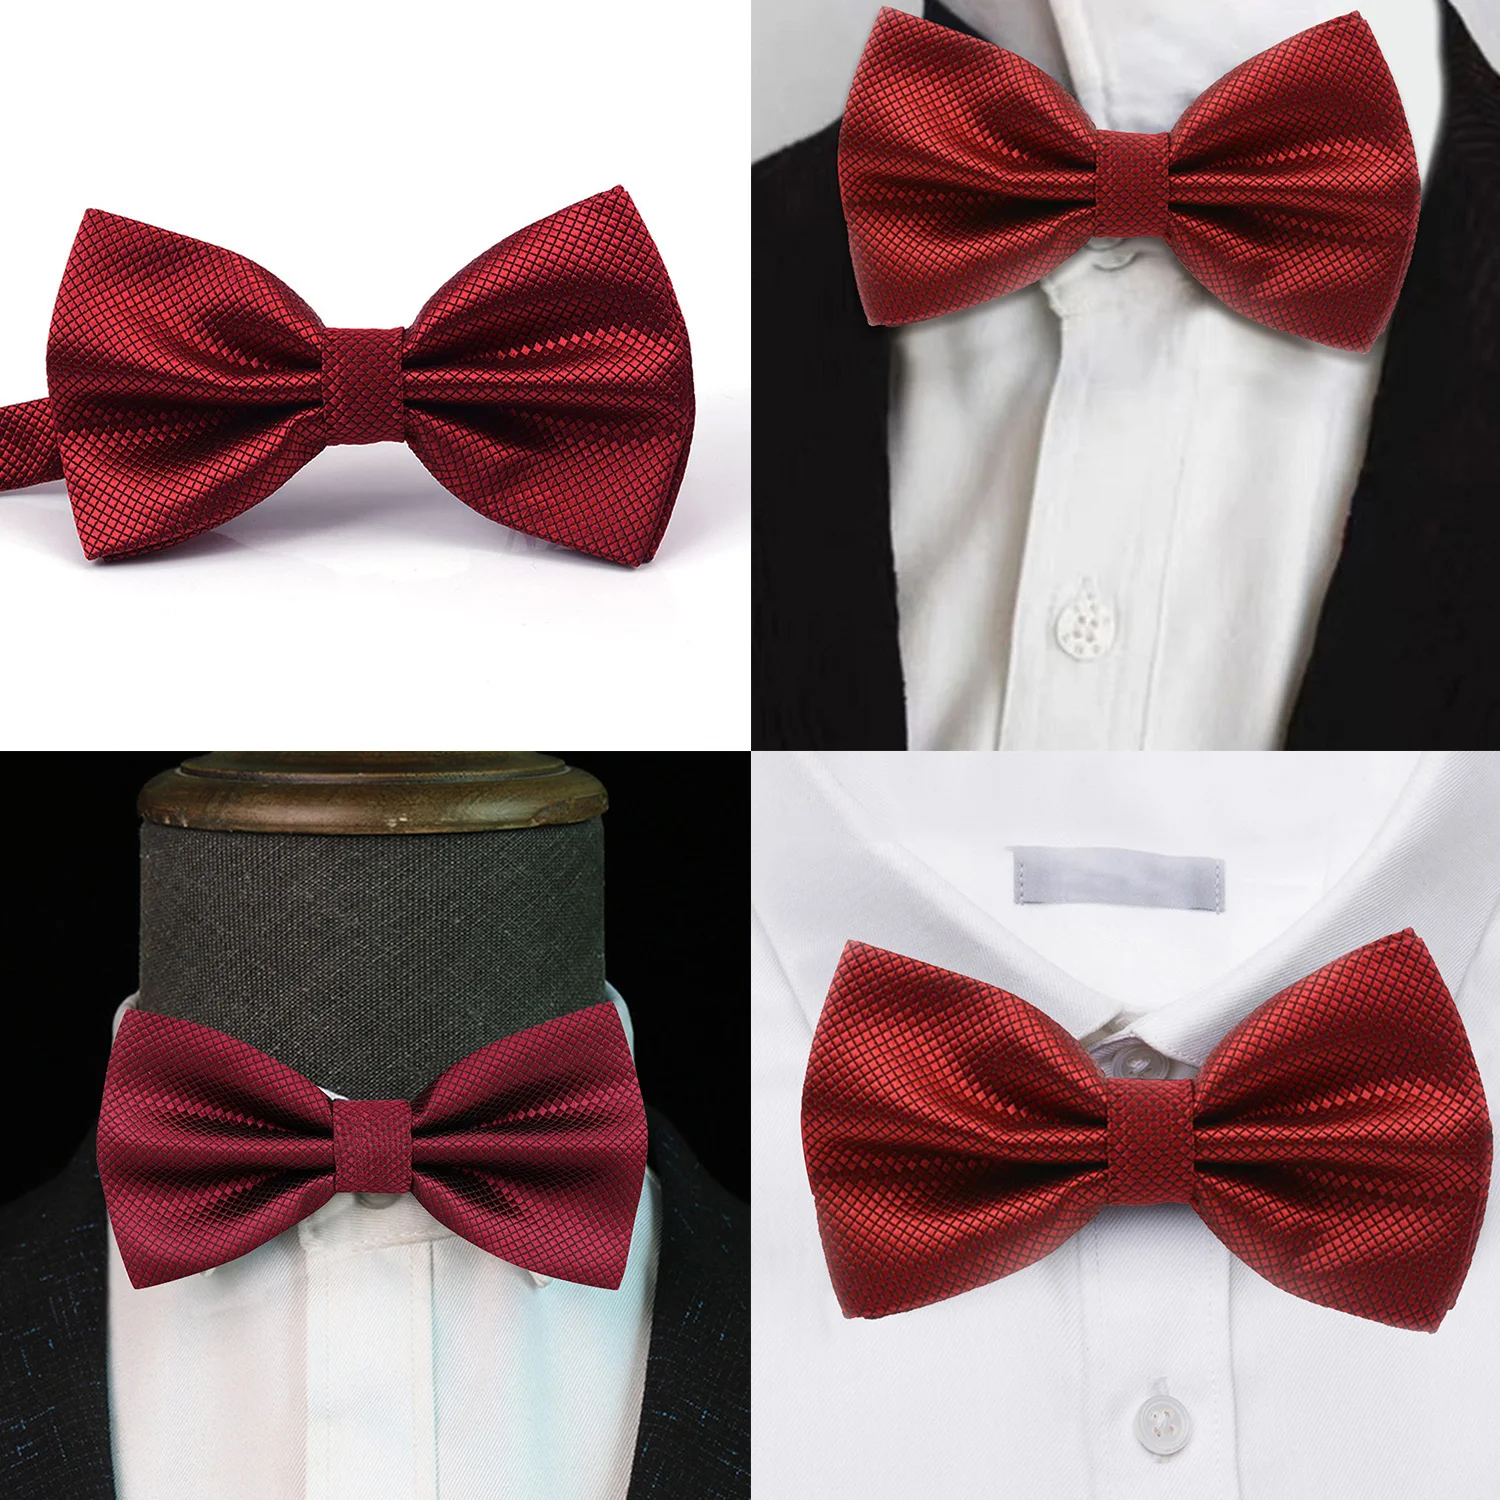 

New Fine Grid Tie Knot Bowtie Fashion Wedding Party Formal Polyester Yarn Gift Adjust Neck Bow Tie Business Wear Accessories